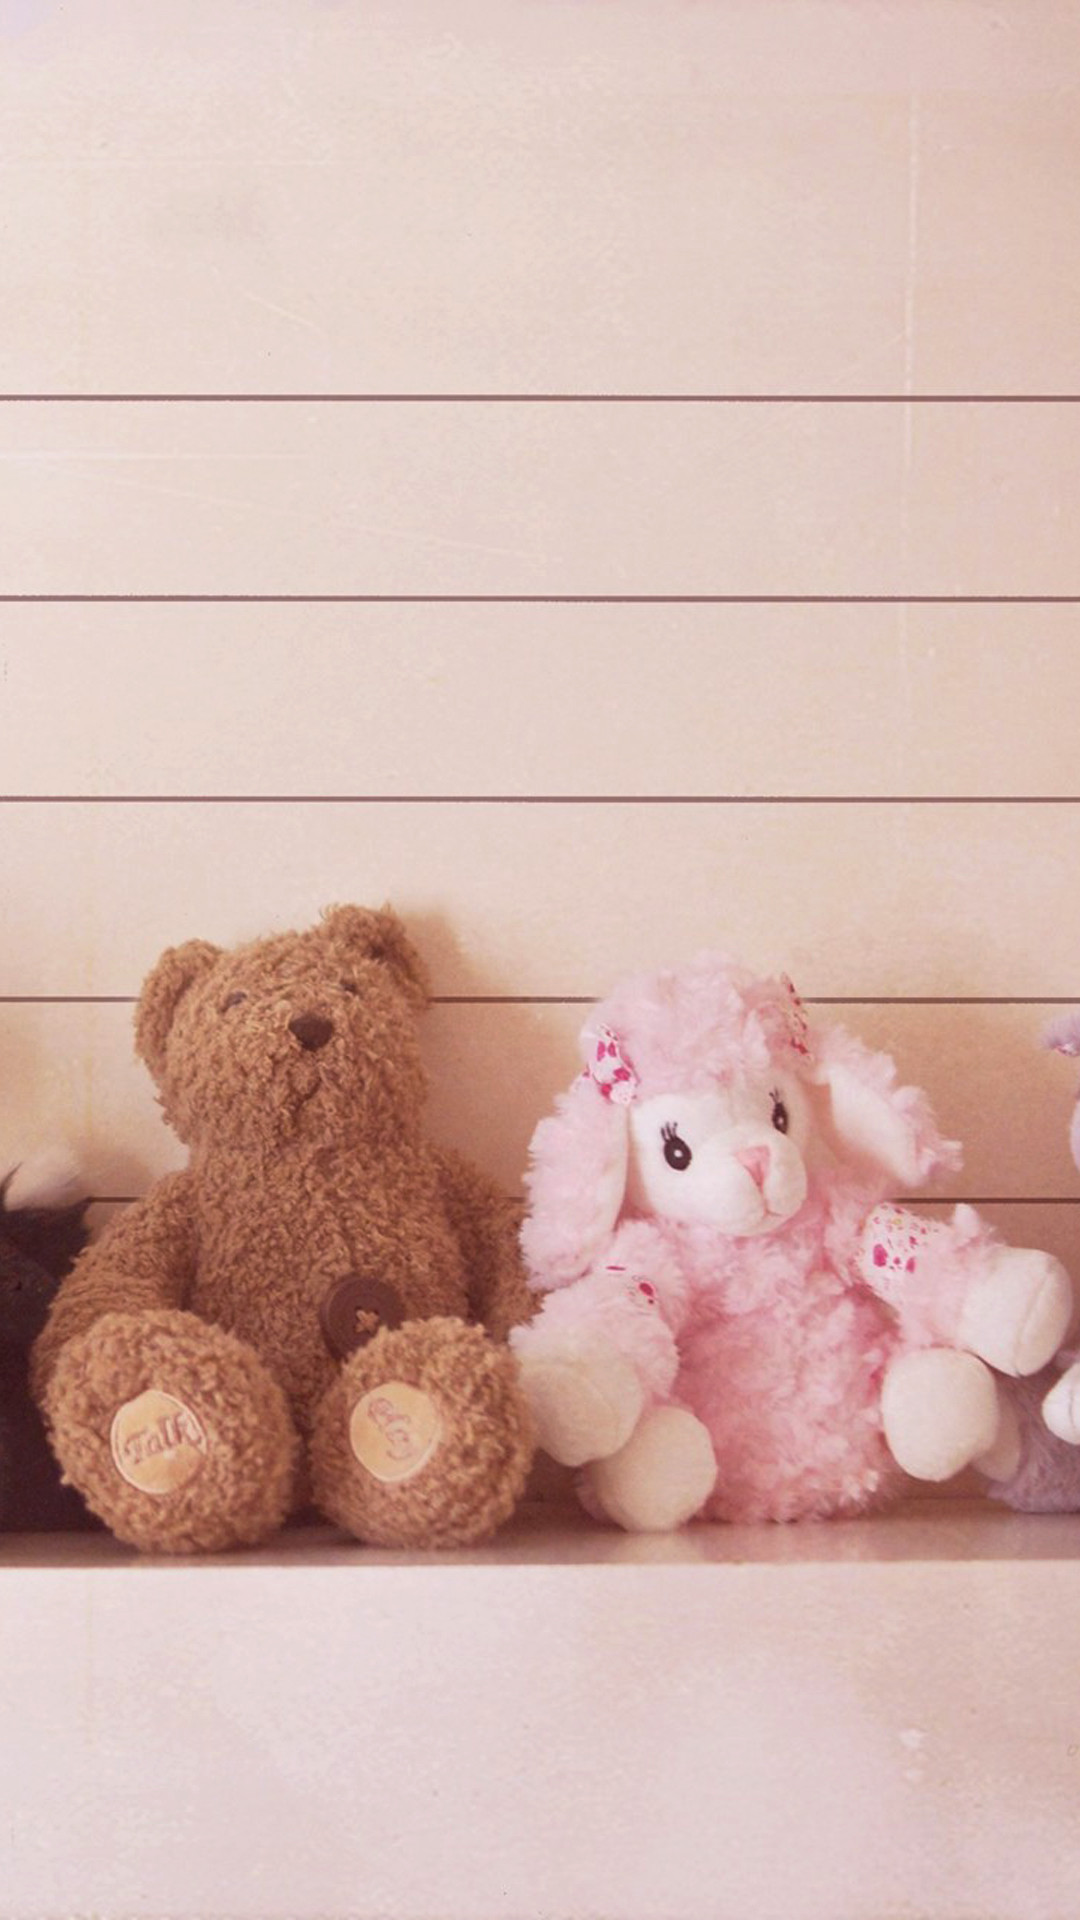 1080x1920 cute teddy bear couple iphone android mobile wallpaper - http://wallfest.com